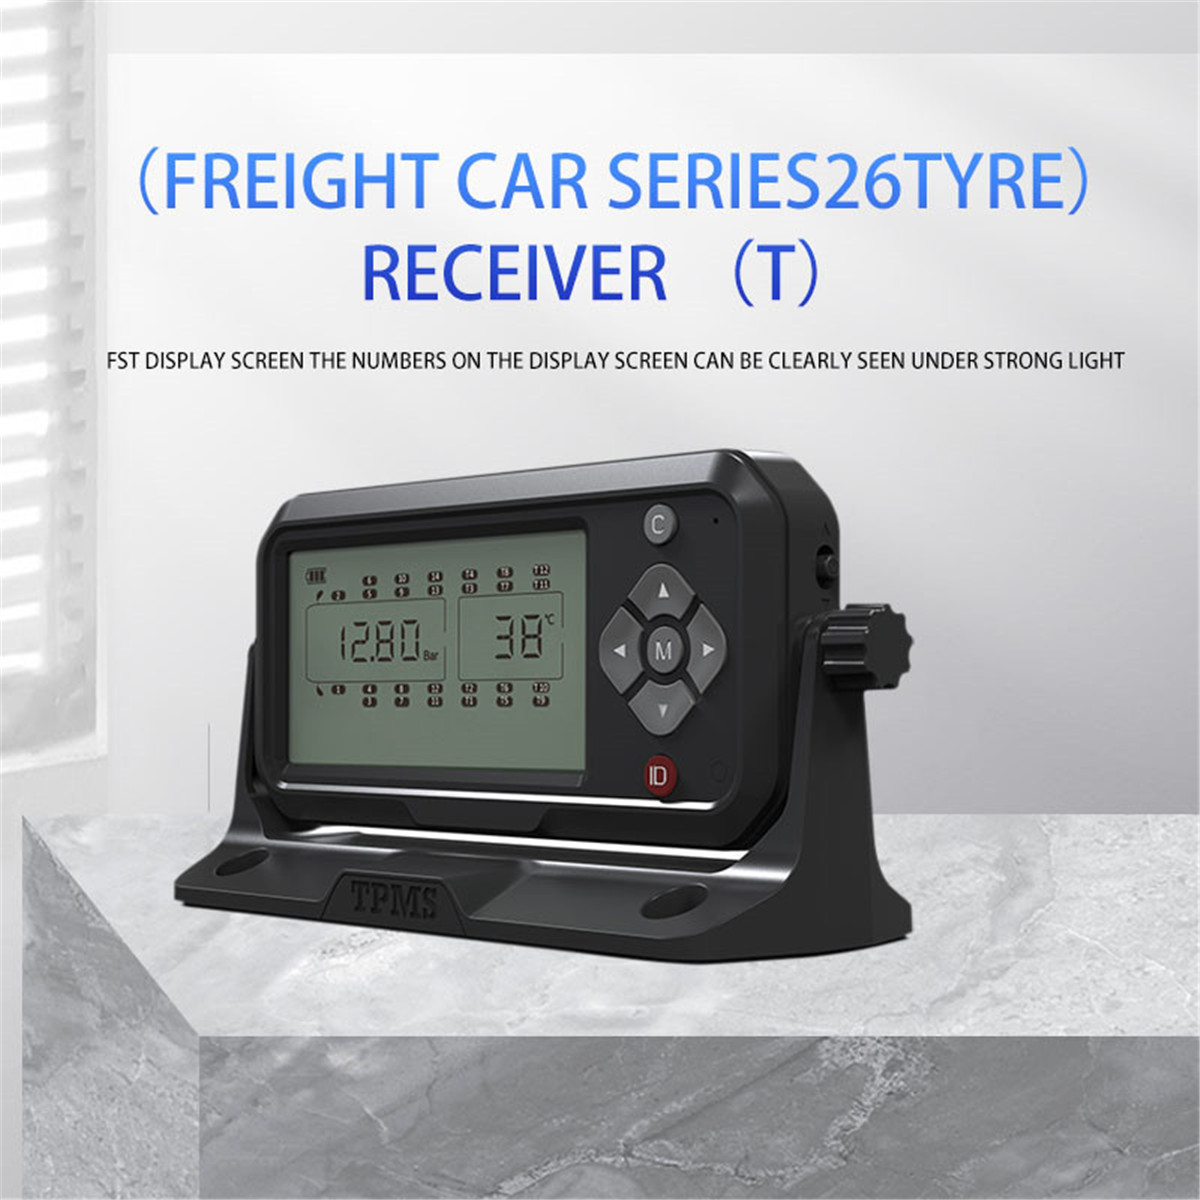 ( Freight car series26tyre) Receiver (7)